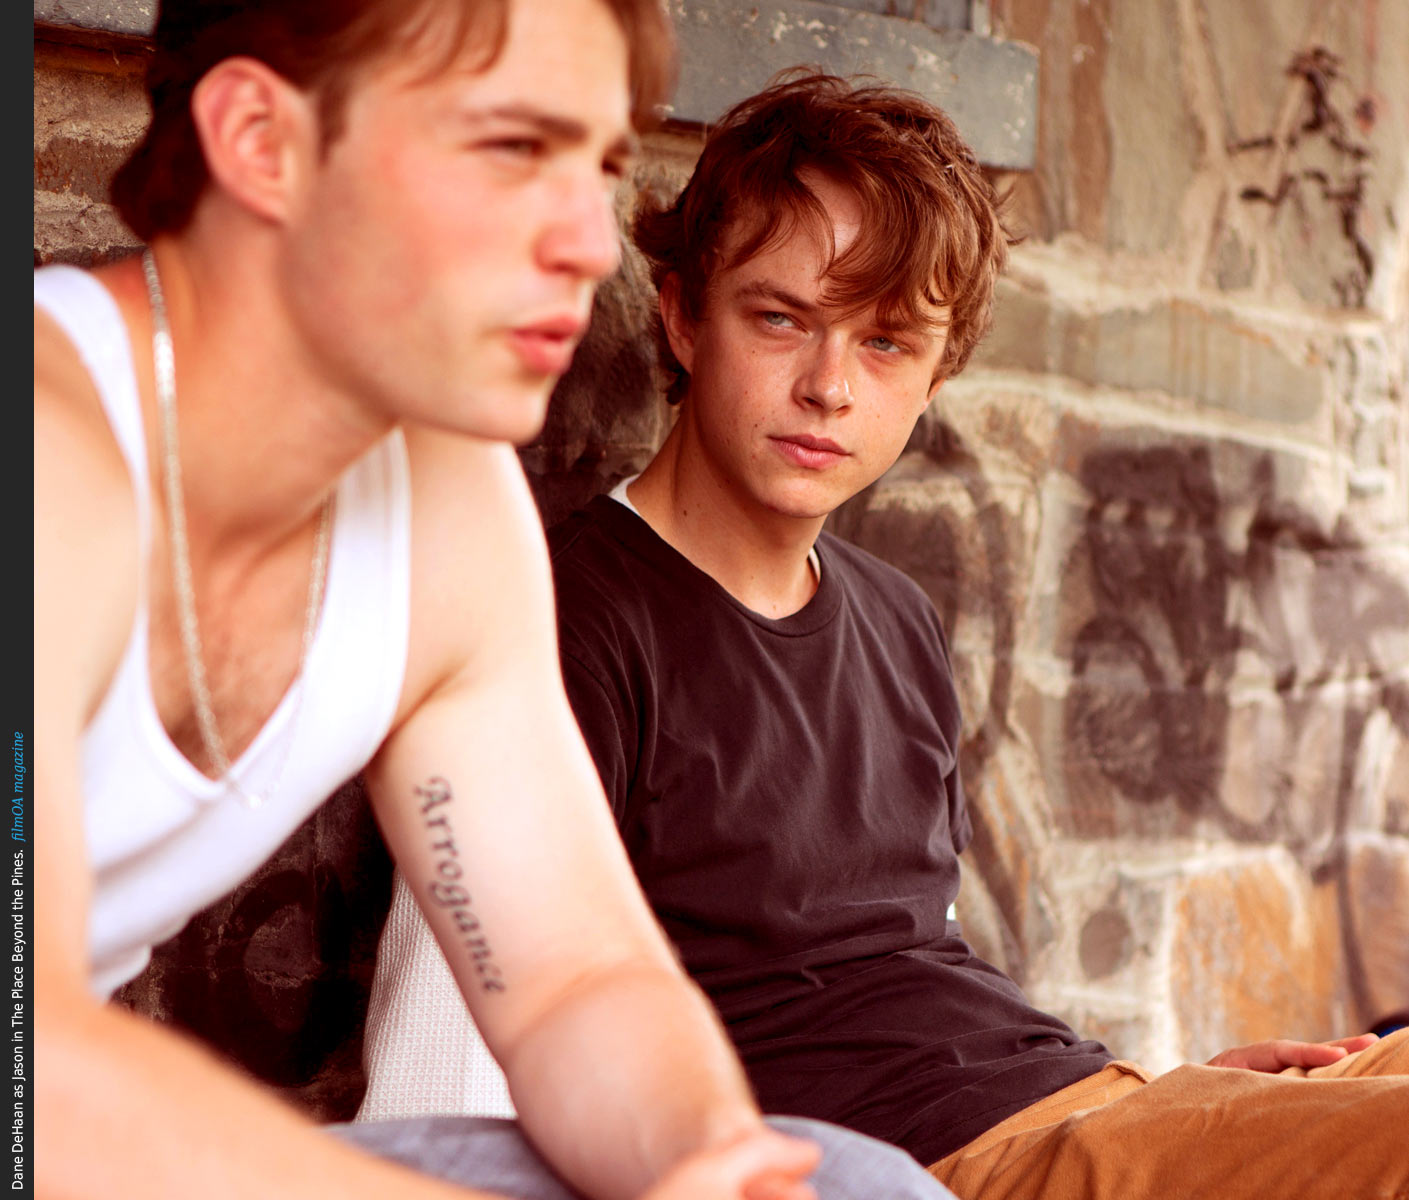 Dane DeHaan as Jason in The Place Beyond the Pines